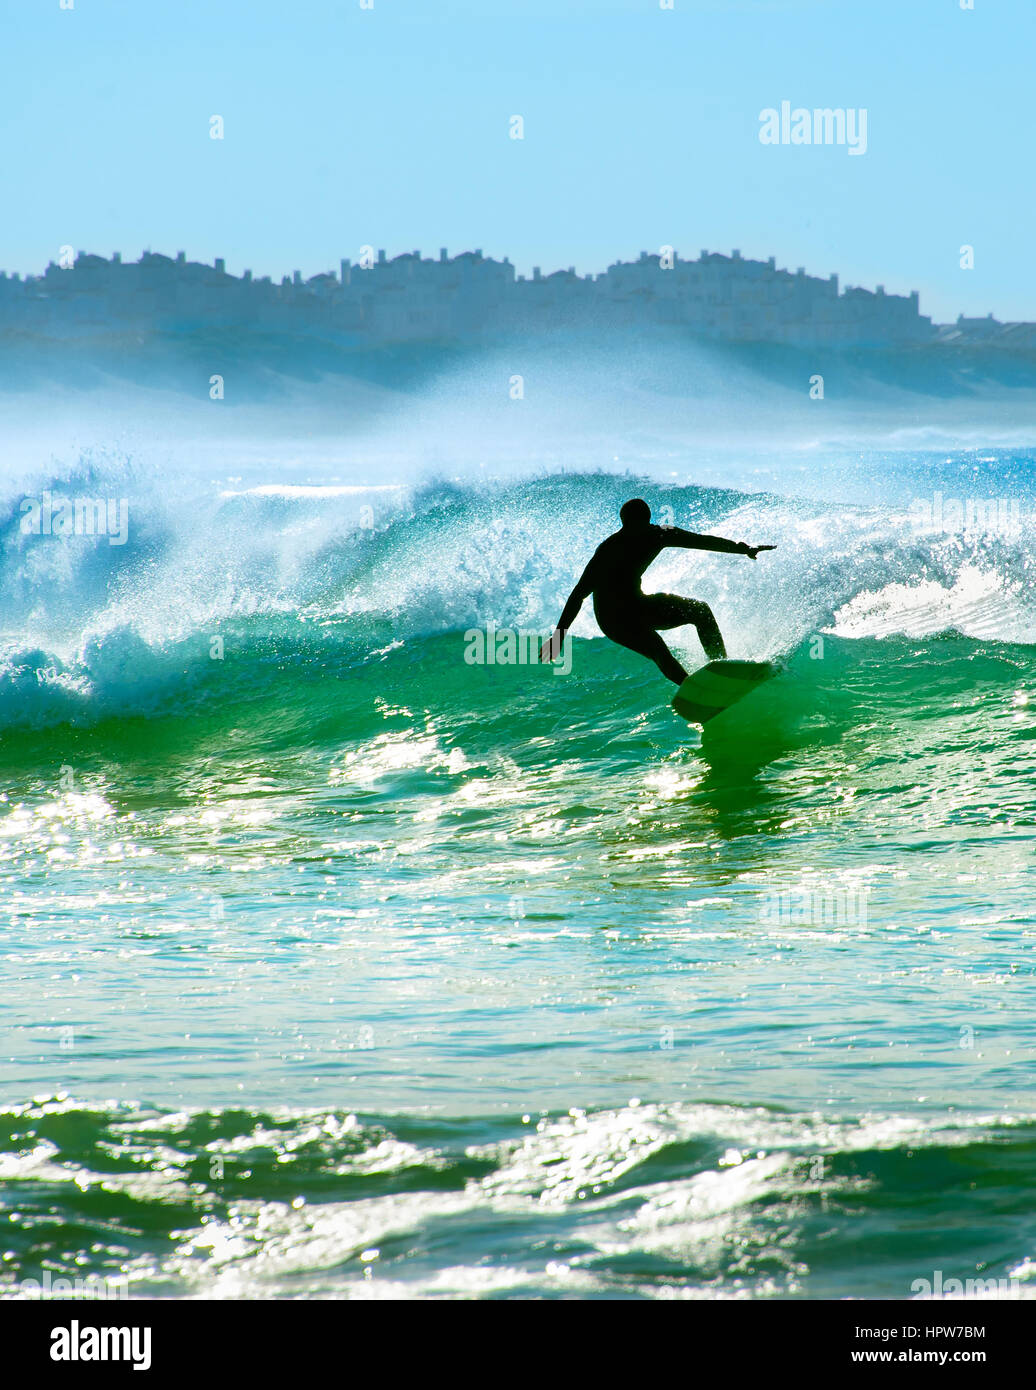 Silhouette of a surfer riding a wave in the ocean Stock Photo